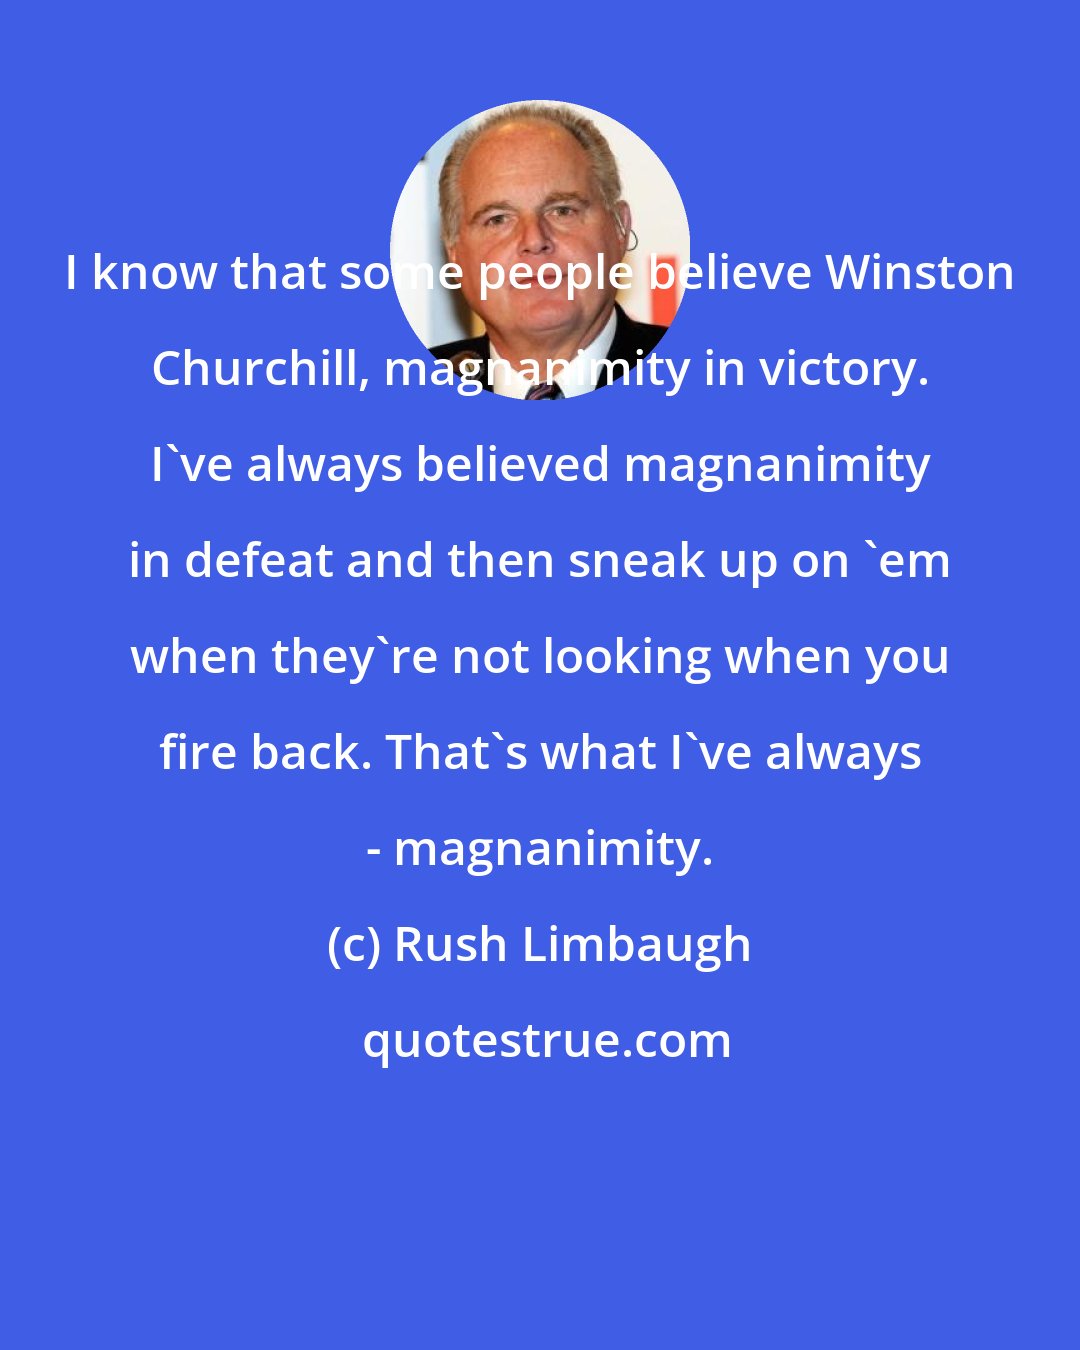 Rush Limbaugh: I know that some people believe Winston Churchill, magnanimity in victory. I've always believed magnanimity in defeat and then sneak up on 'em when they're not looking when you fire back. That's what I've always - magnanimity.